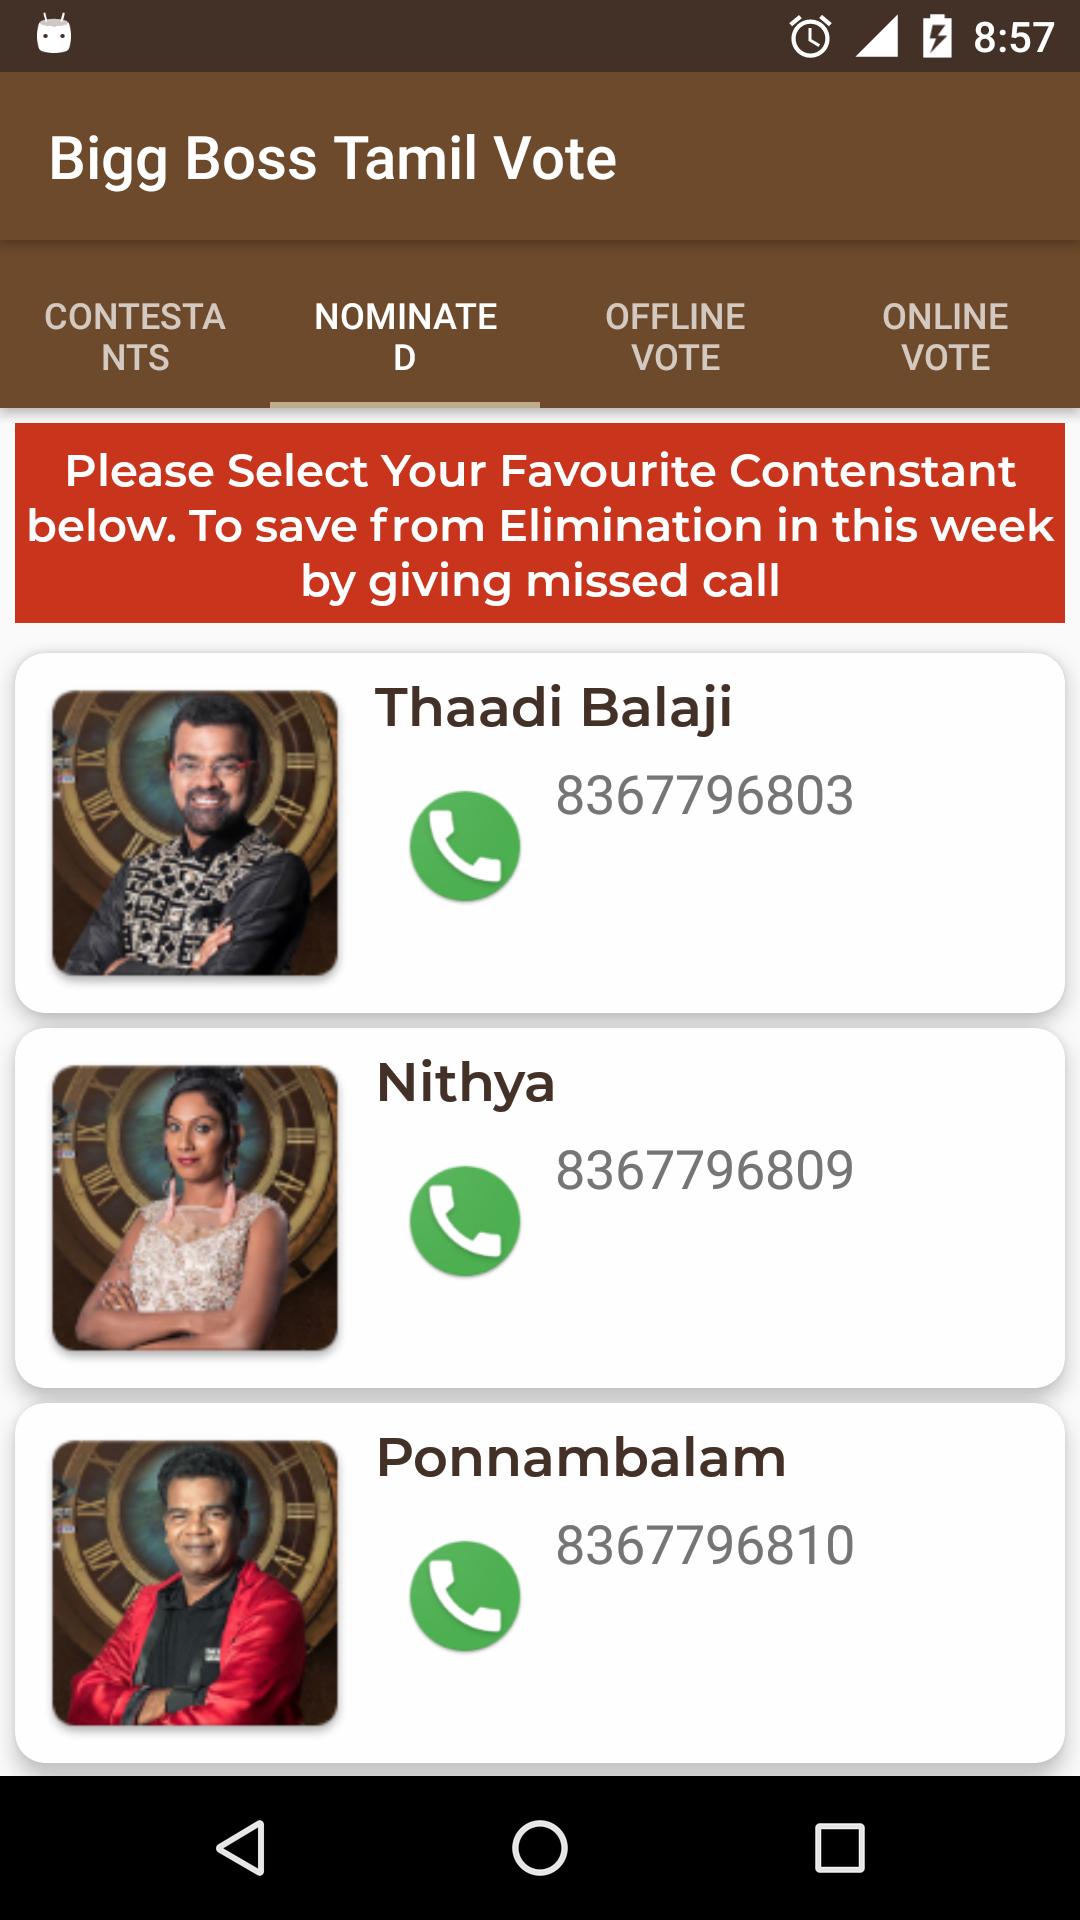 Bigg Boss Tamil Vote for Android - APK Download